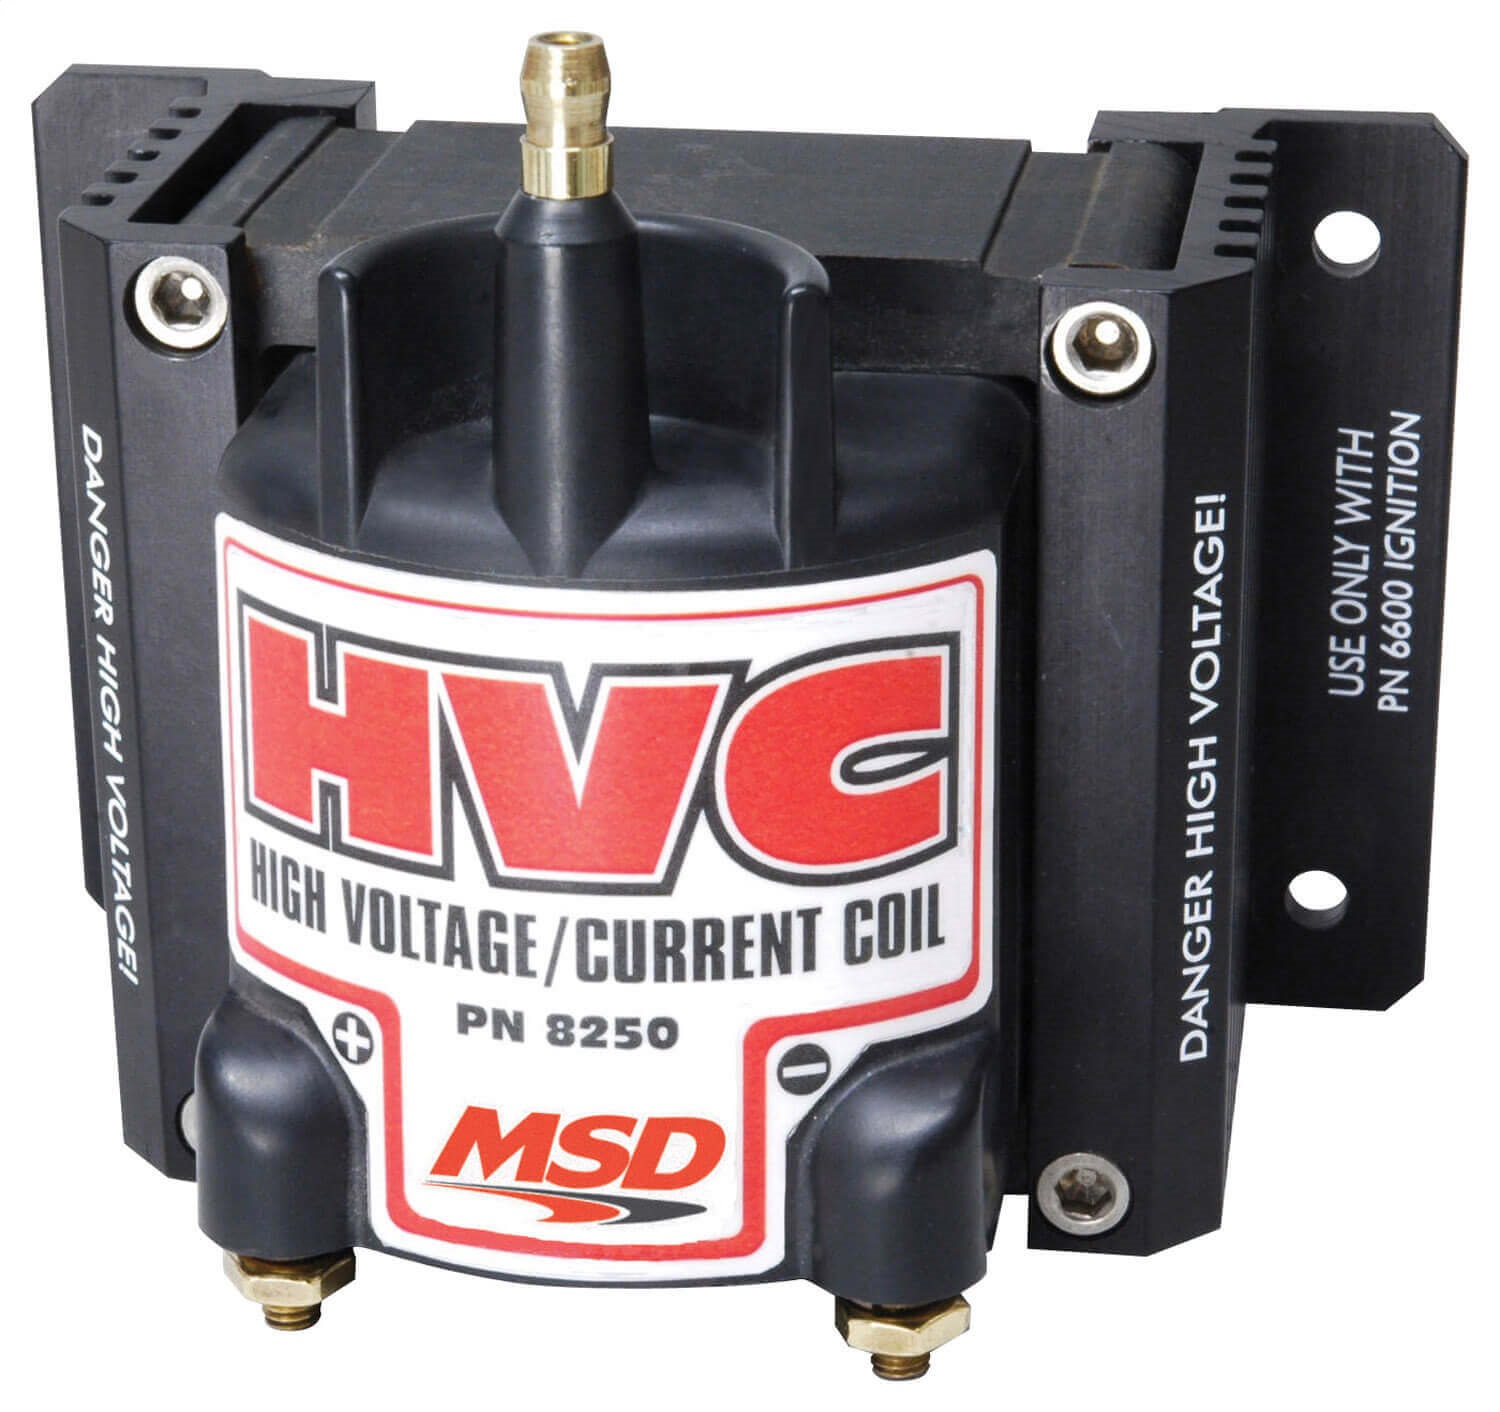 6 HVC Ignition Coil - 8250